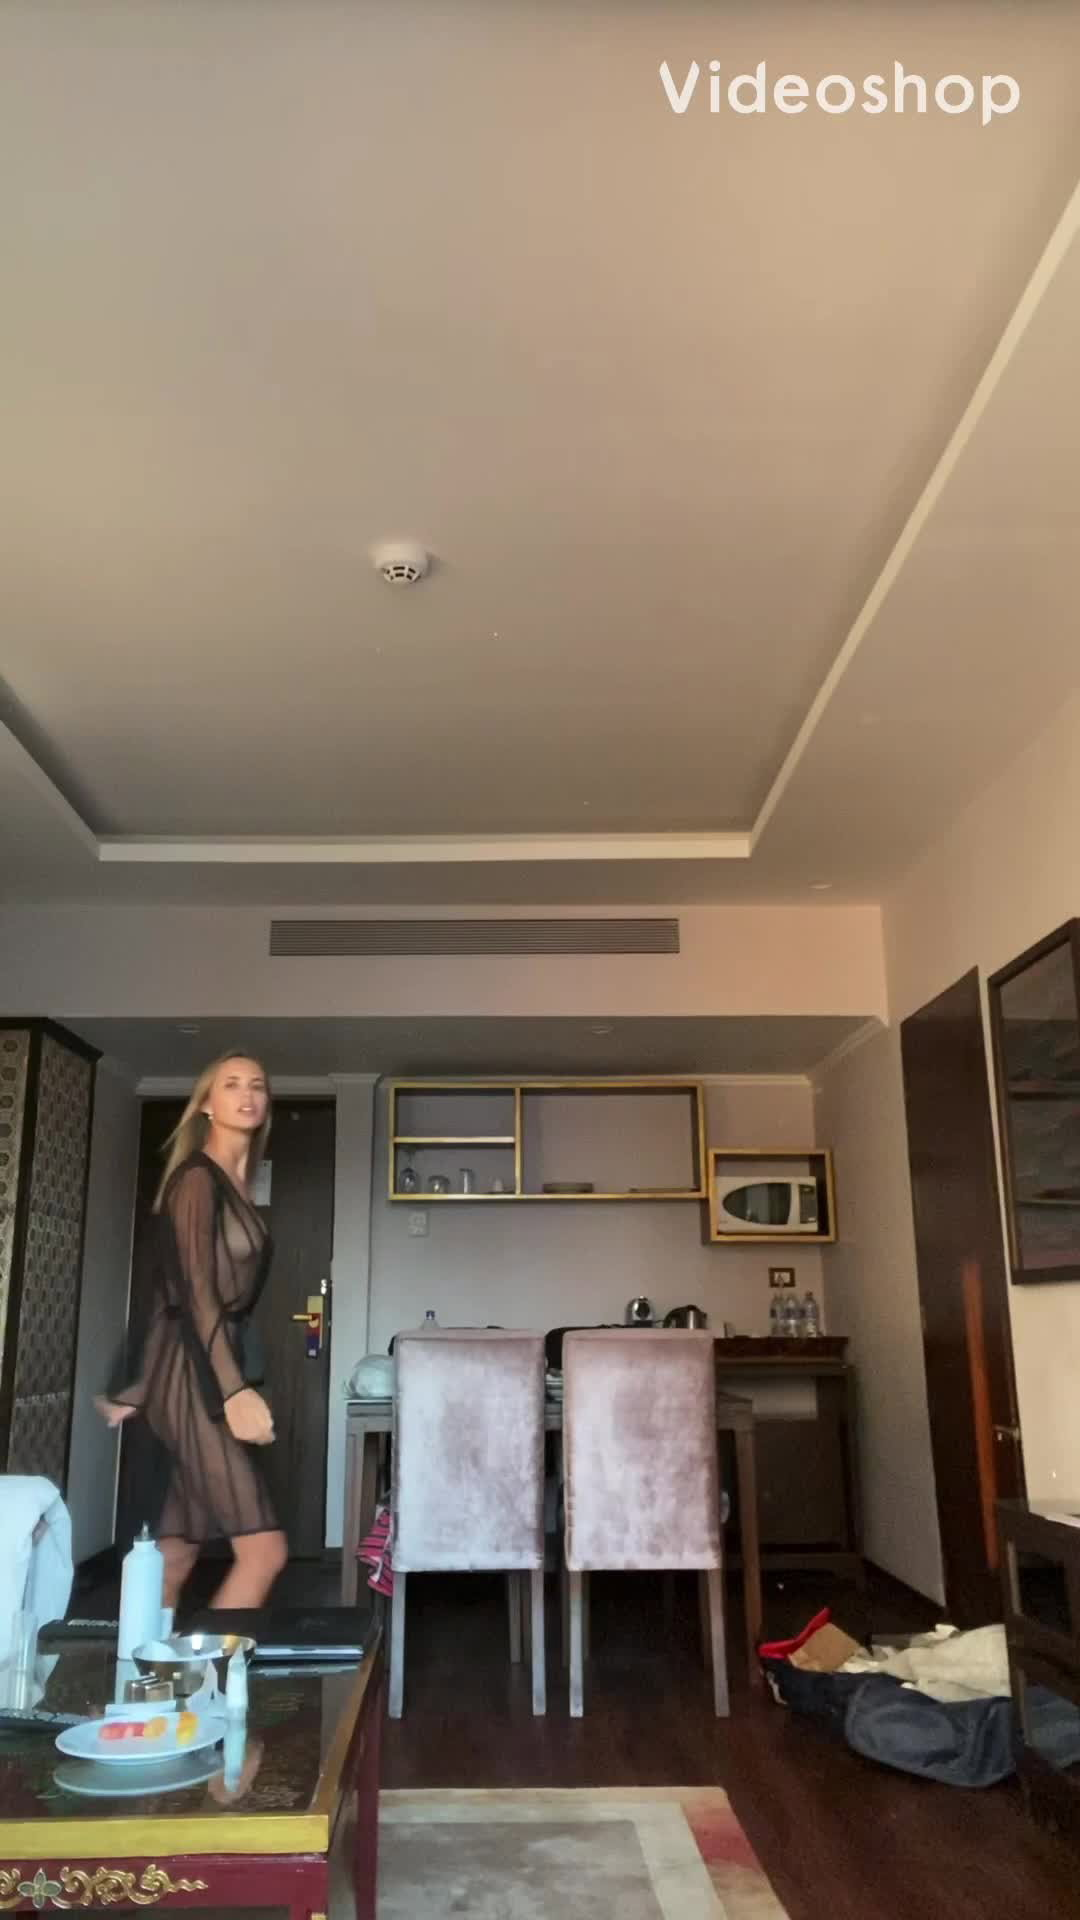 Video post by SexFantasy30